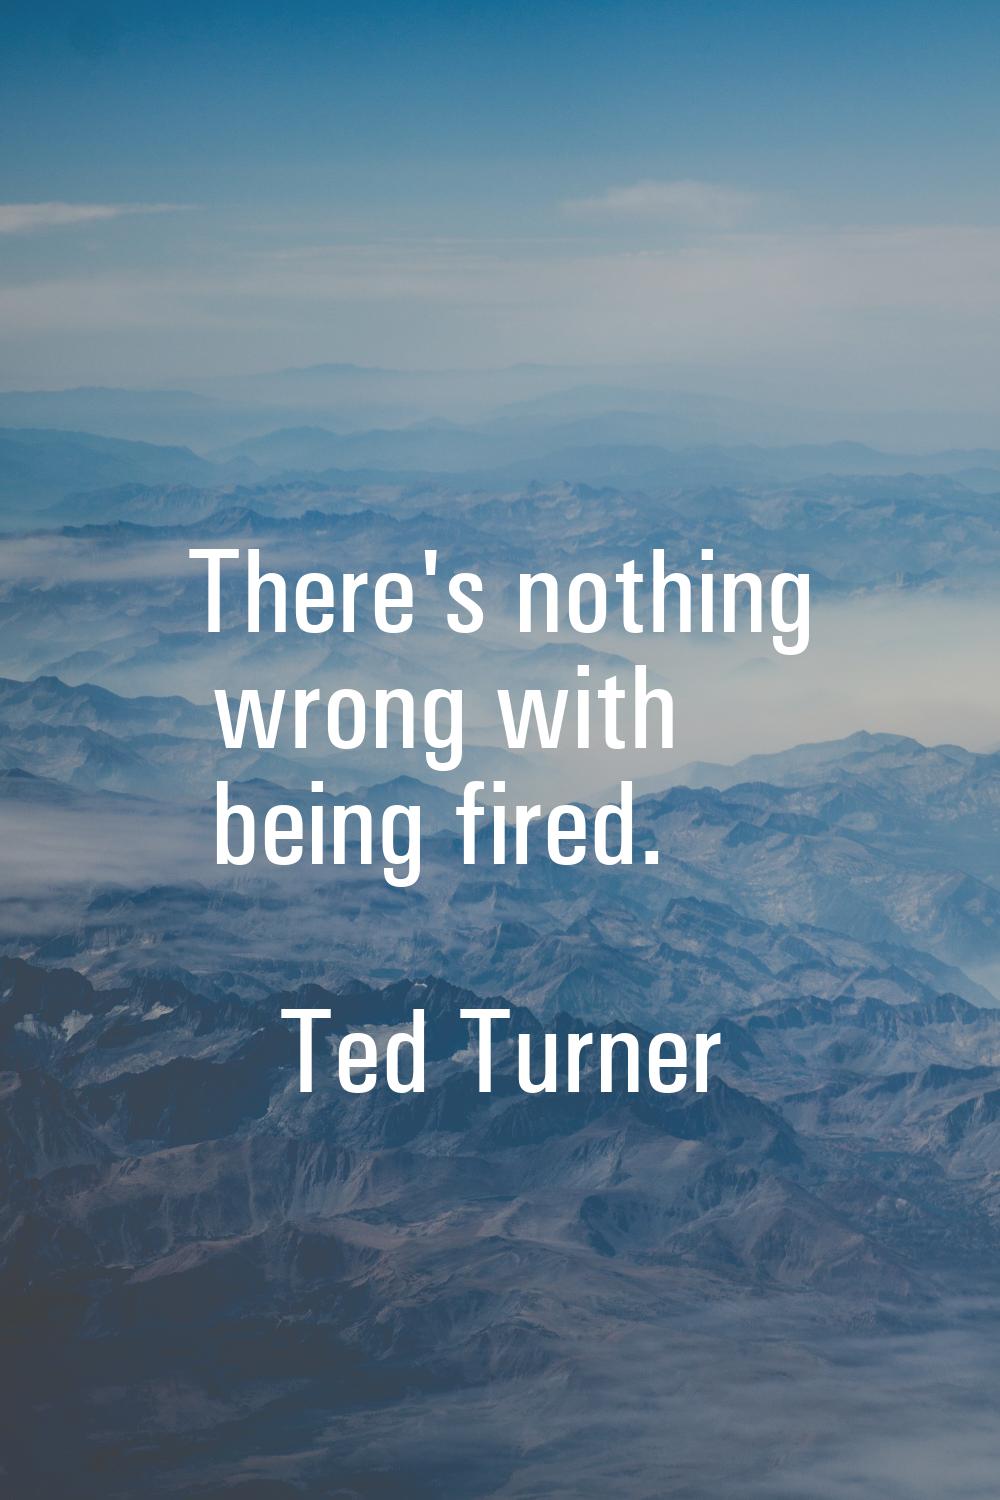 There's nothing wrong with being fired.